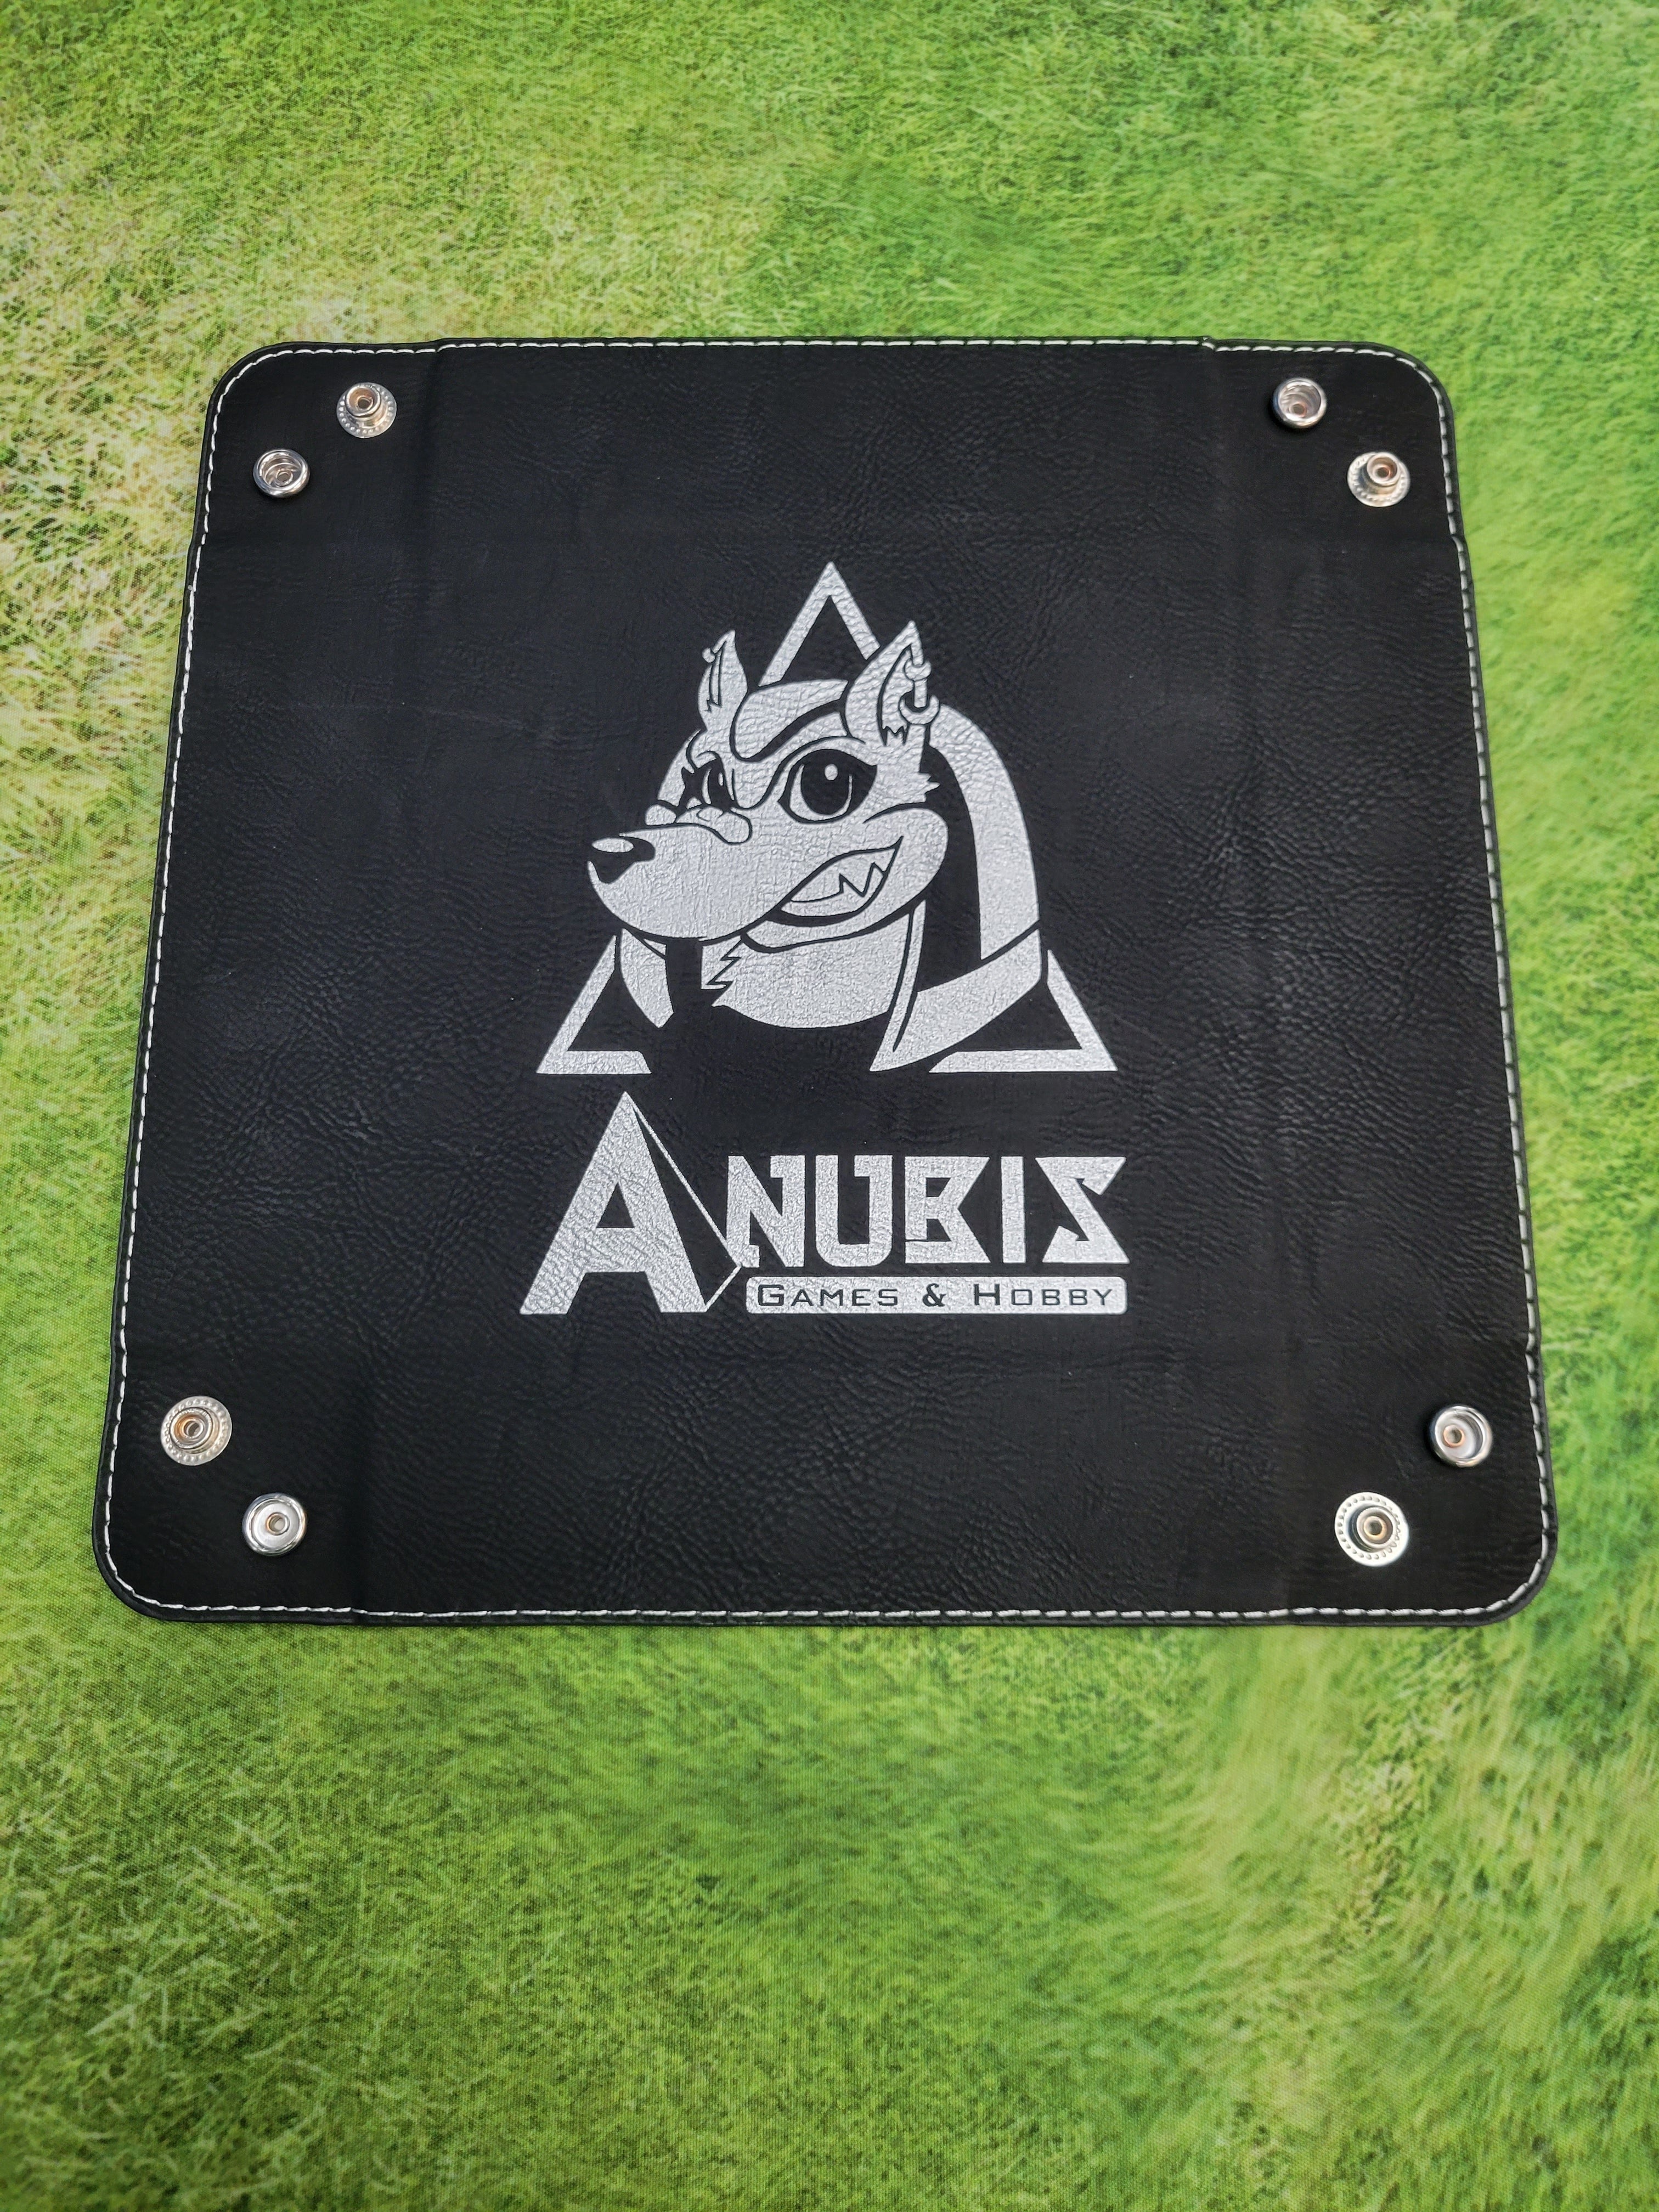 Anubis Dice Tray - Black | Anubis Games and Hobby